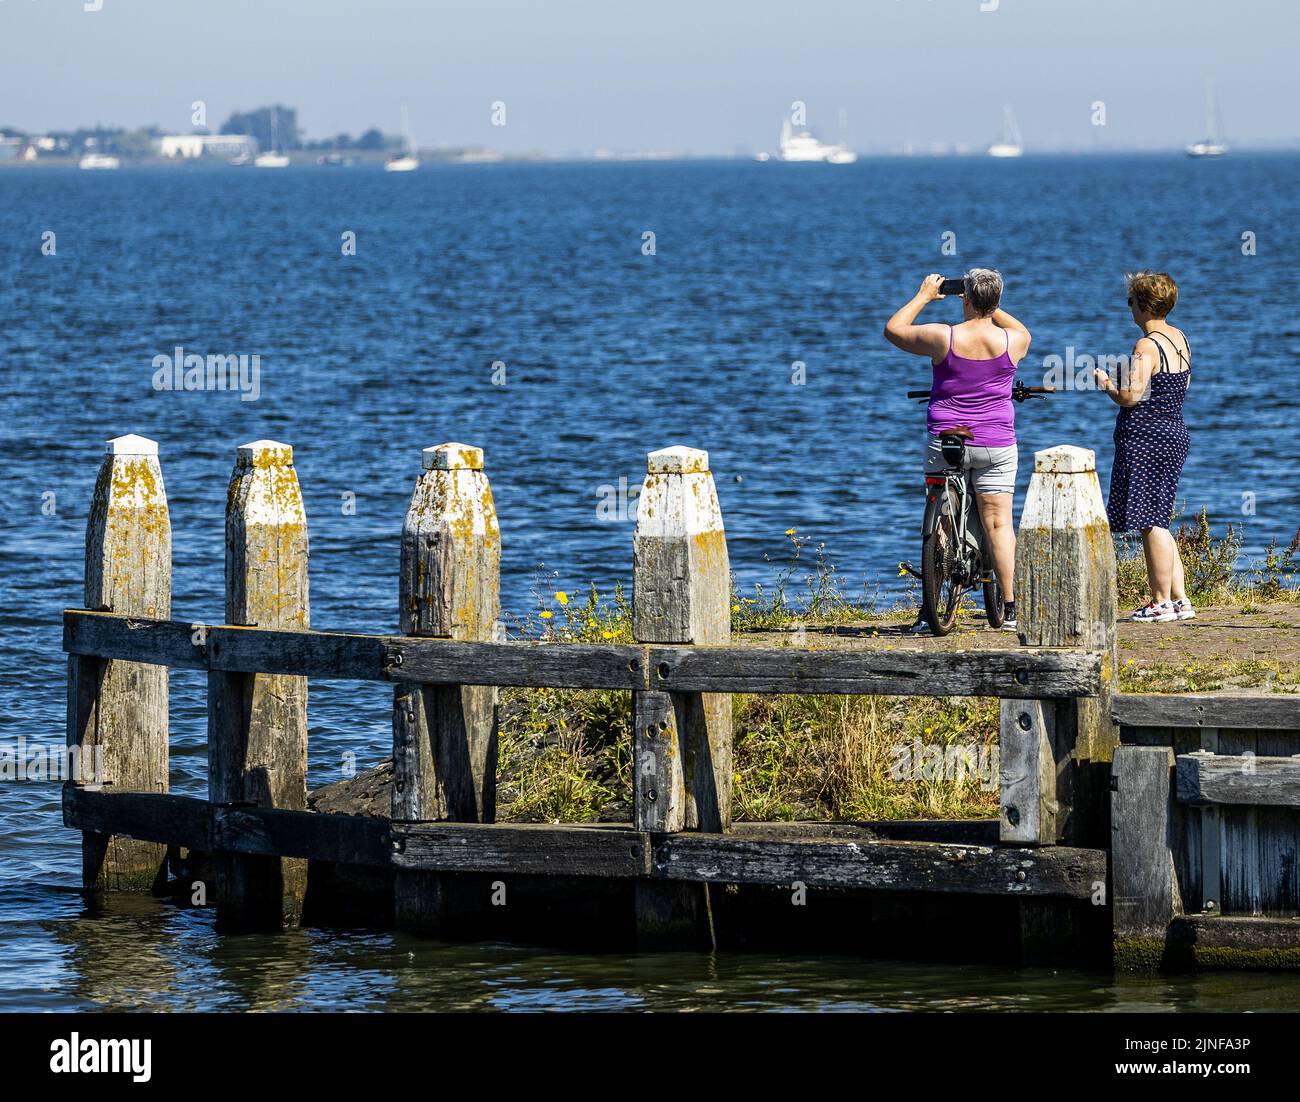 2022-08-11 11:34:54 MARKEN - Tourists are looking for refreshment in the warm weather. In the coming days, the Netherlands will be burdened by a heat wave with tropical temperatures of more than 30 degrees. ANP REMKO DE WAAL netherlands out - belgium out Stock Photo